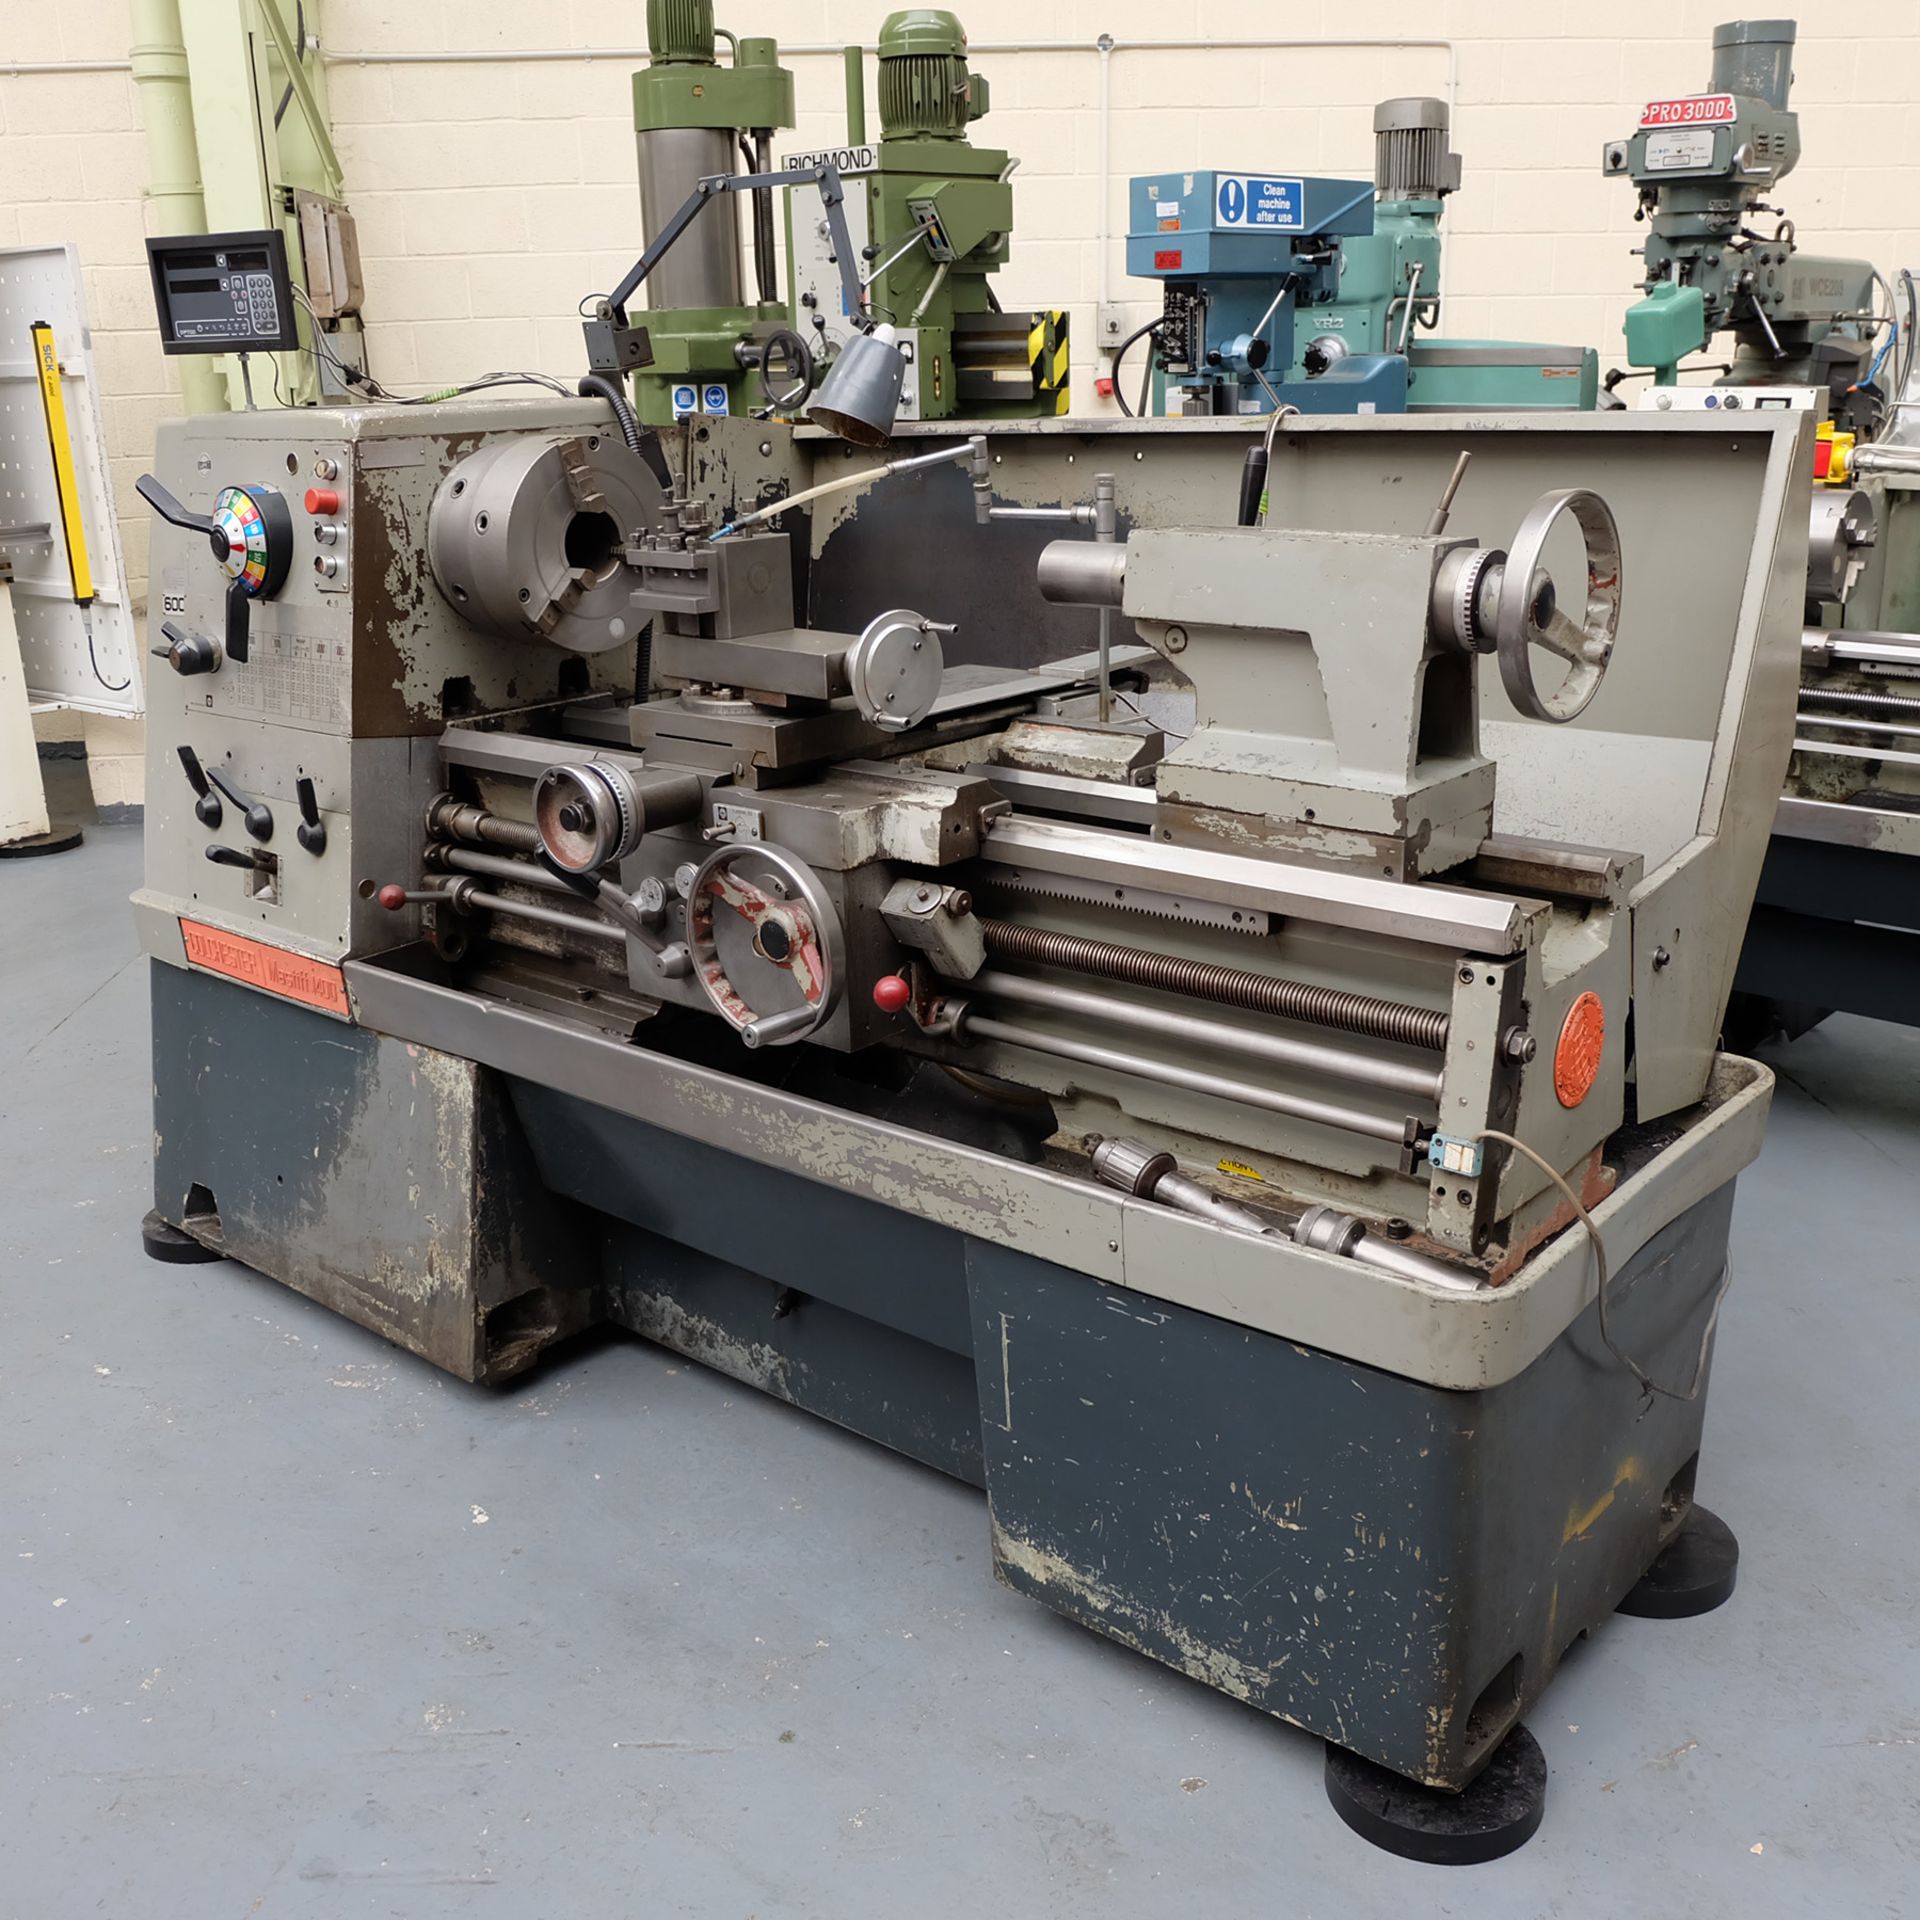 Colchester Mastiff 1400 Gap Bed Centre Lathe. 21" Swing Over Bed. 40" Distance Between Centres. - Image 3 of 7